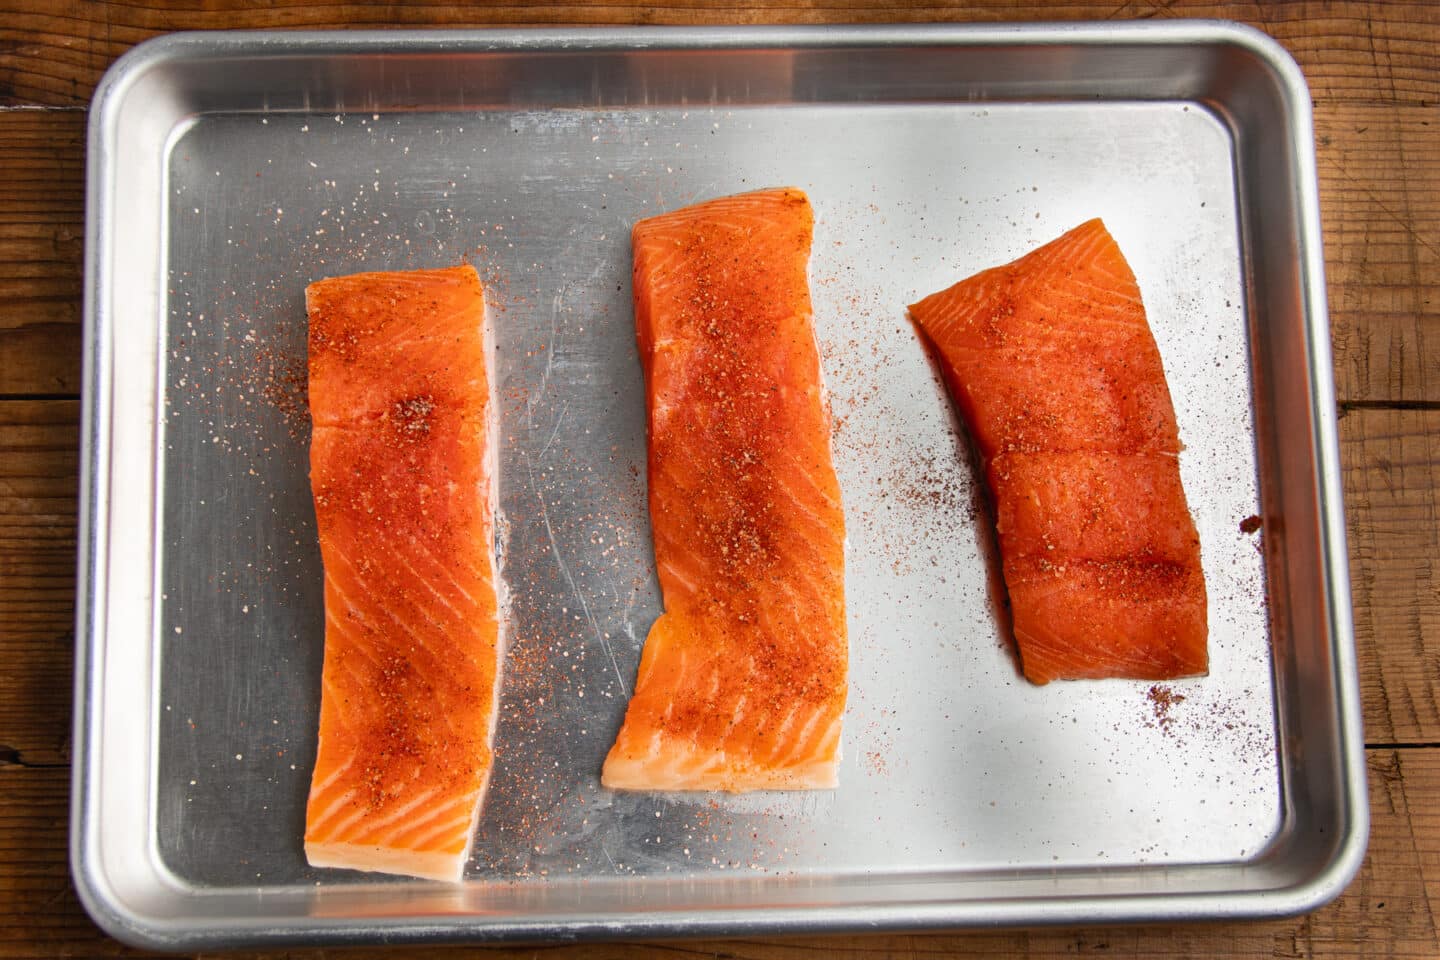 This is a picture of the salmon seasoned with paprika before cooking.